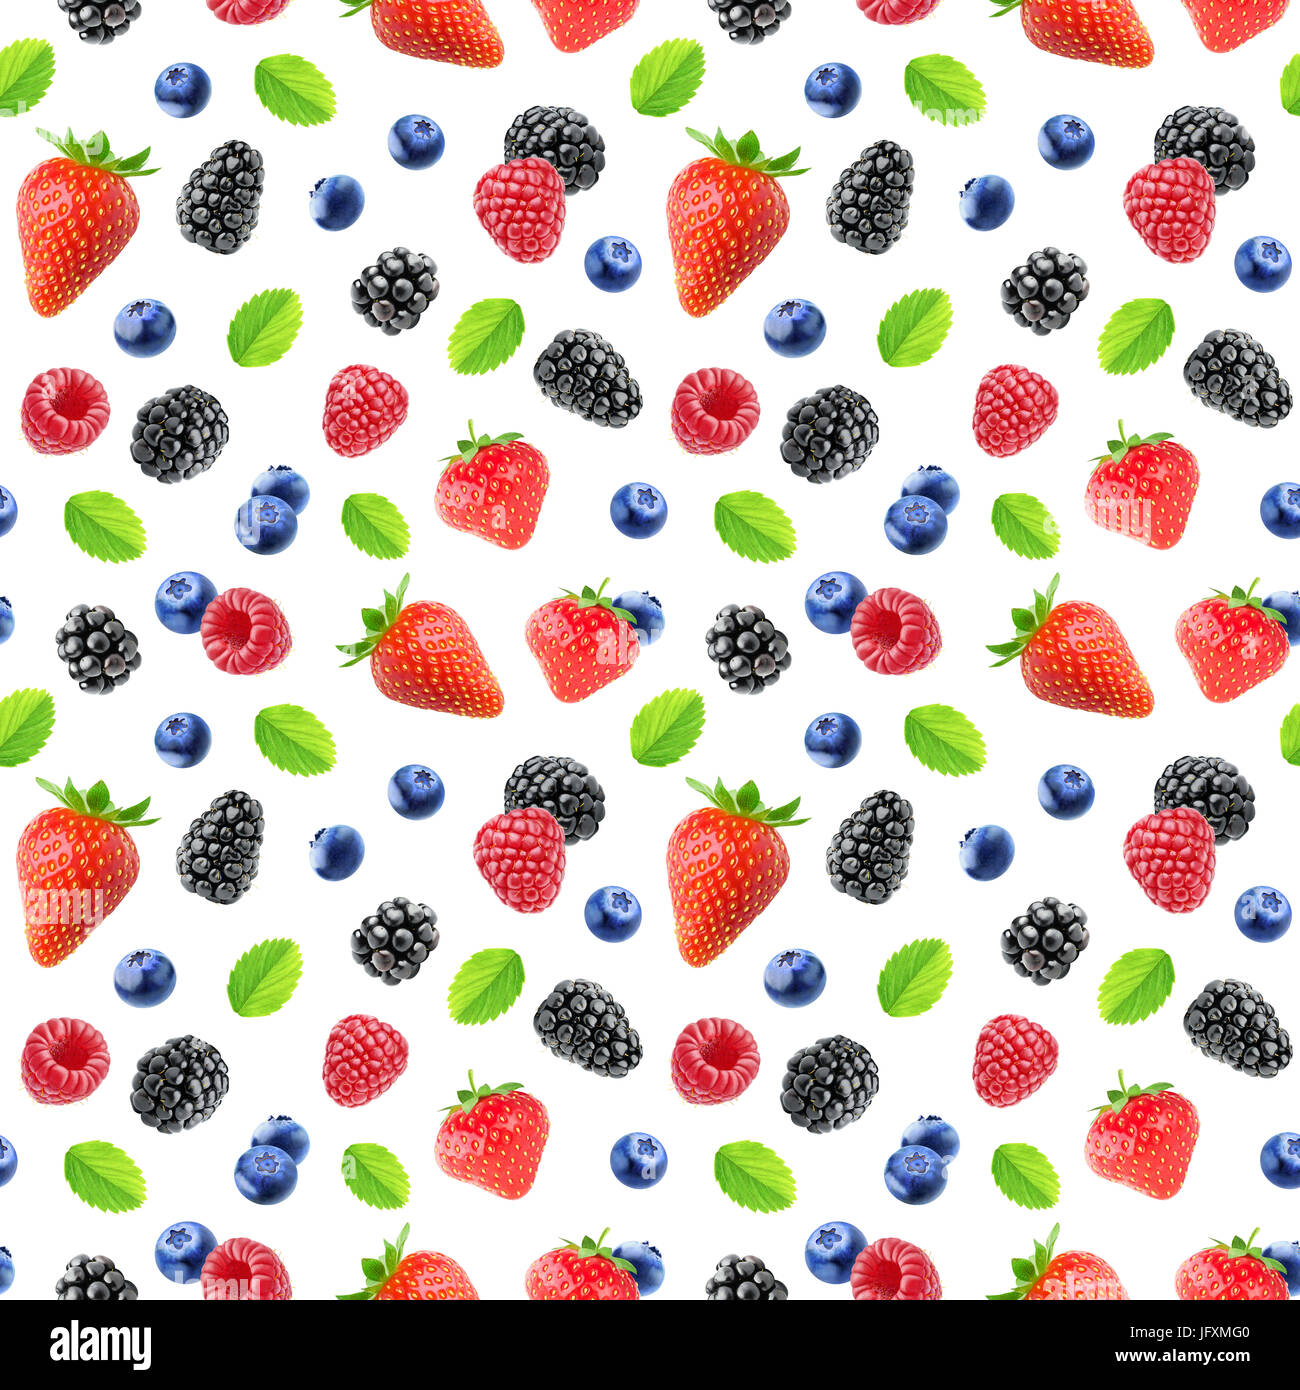 Berries pattern. Seamless background with strawberry, blackberry, raspberry and blueberry fruits isolated on white background with clipping path Stock Photo